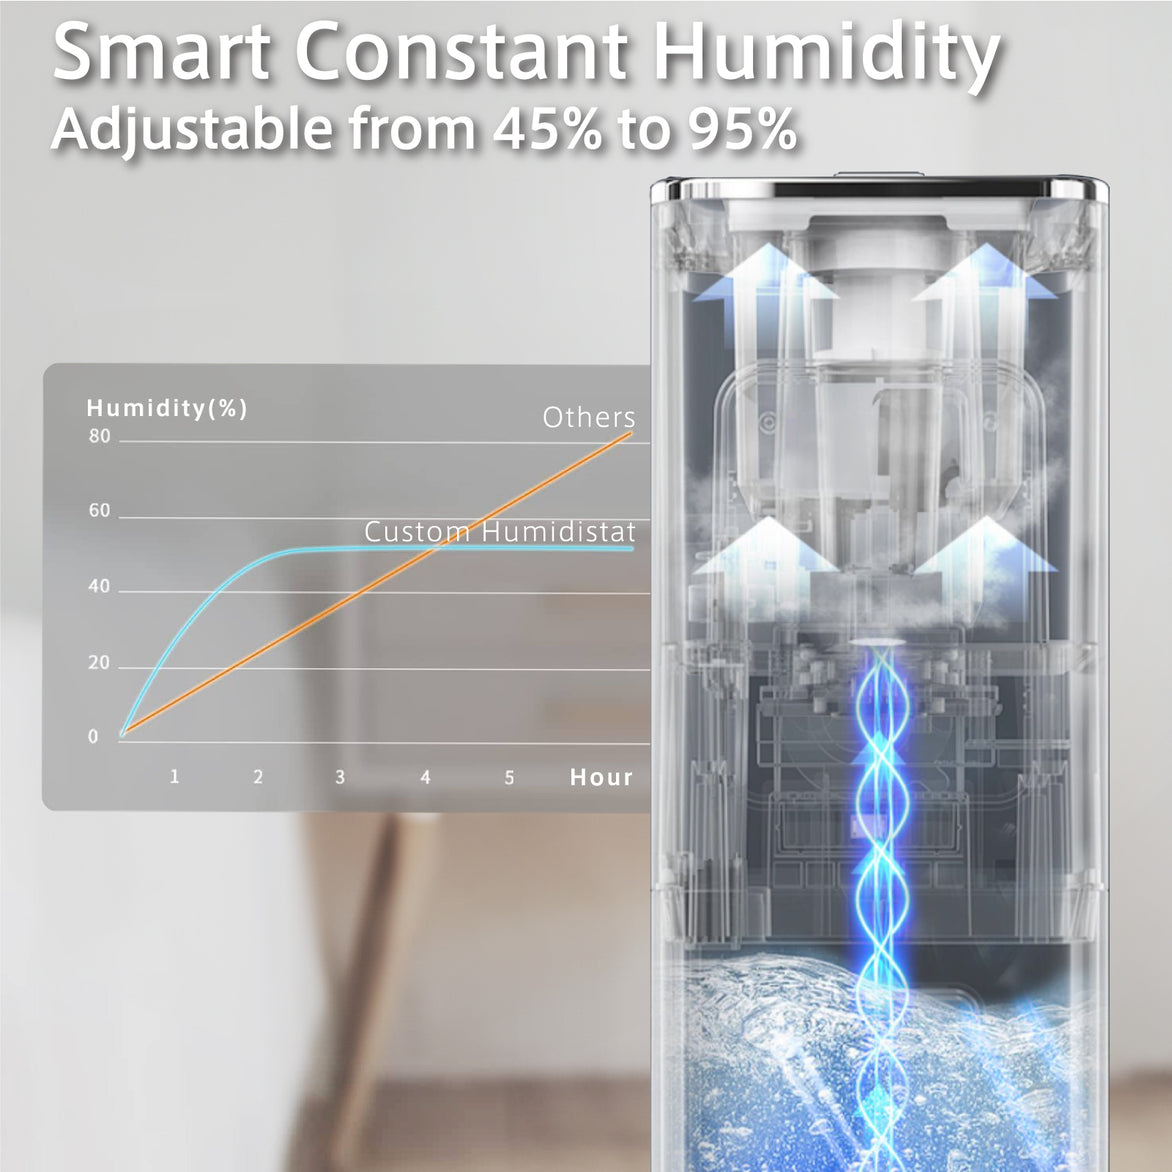 Cool and Warm Mist Humidifiers for Bedroom Large Room, YOKEKON 3.4Gal/13L Floor Humidifiers for Home 1000 sq ft, Quickly & Evenly Humidify Whole House, Top Fill, Aroma Box, Baby Yoga Plants, Silver